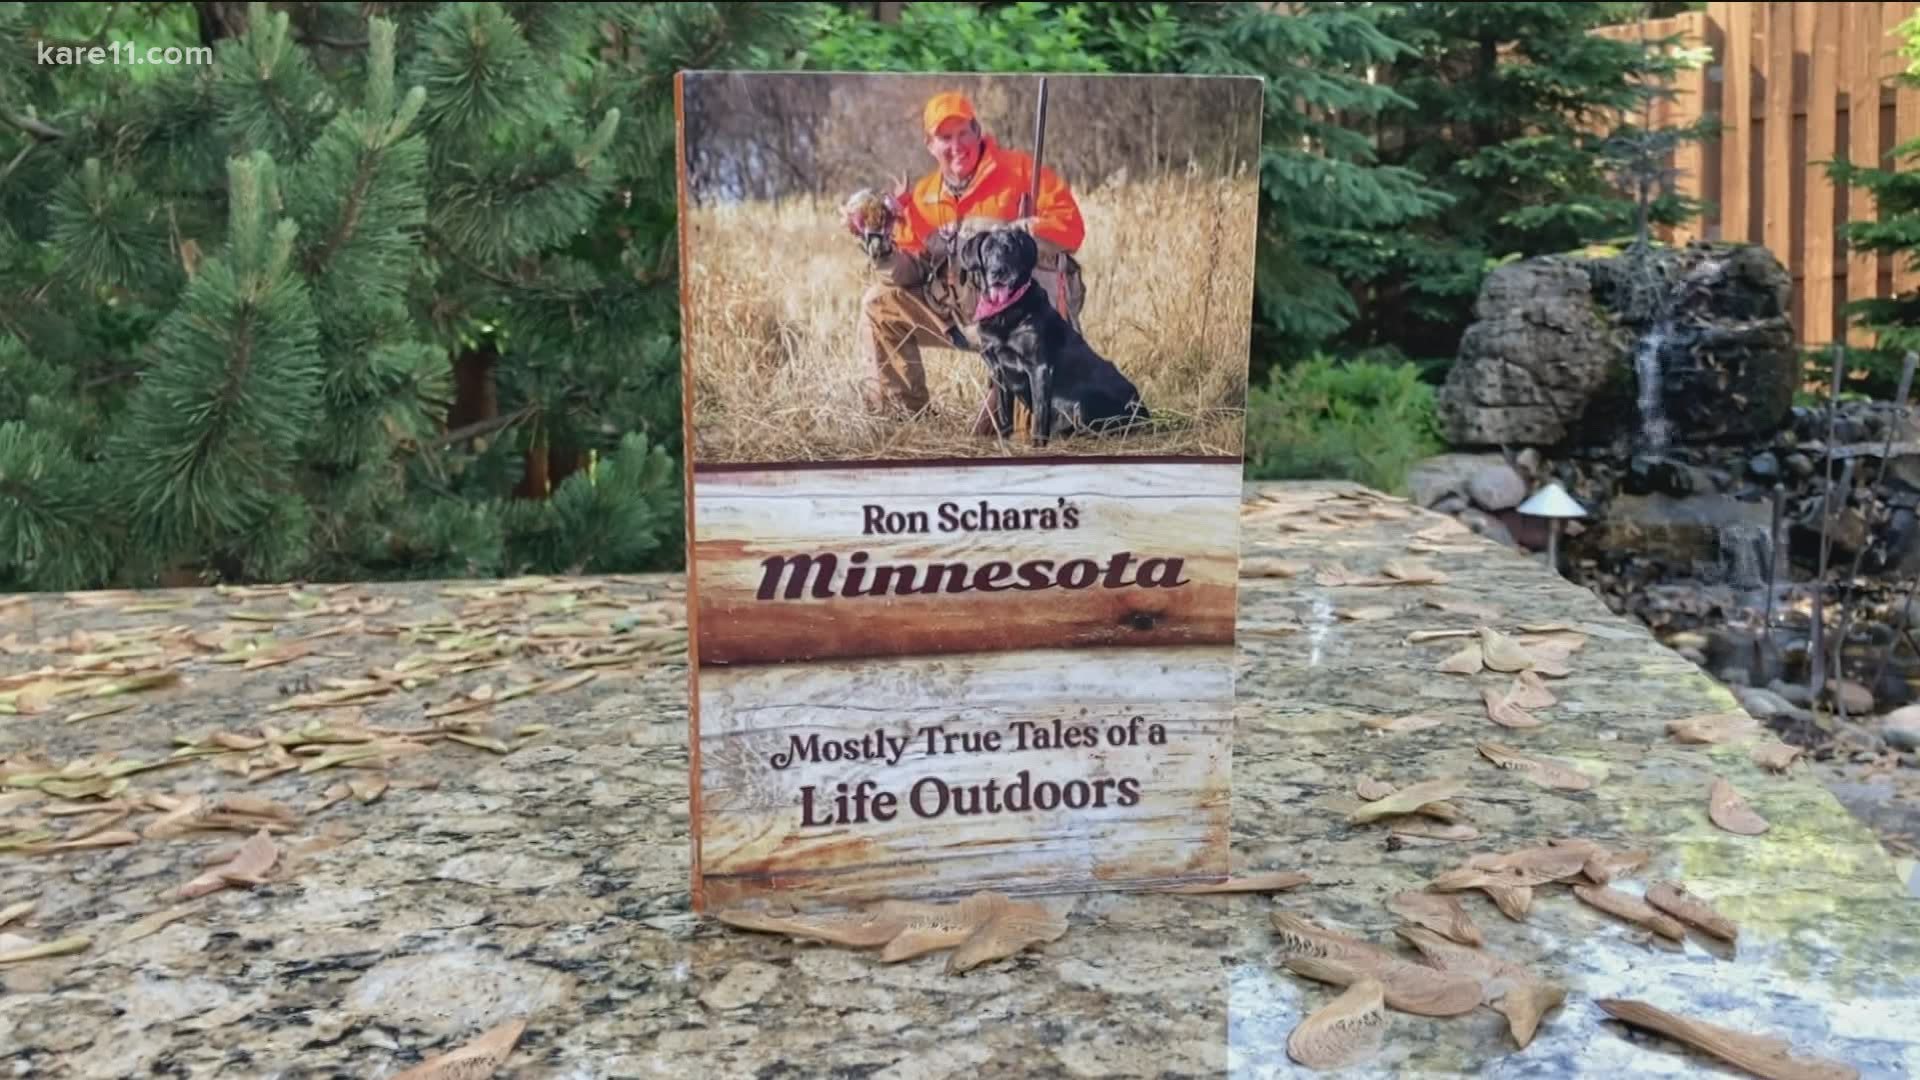 For decades, Ron Schara came into our homes on Sunday nights on KARE 11 with "Minnesota Bound," telling our state's stories of the great outdoors.